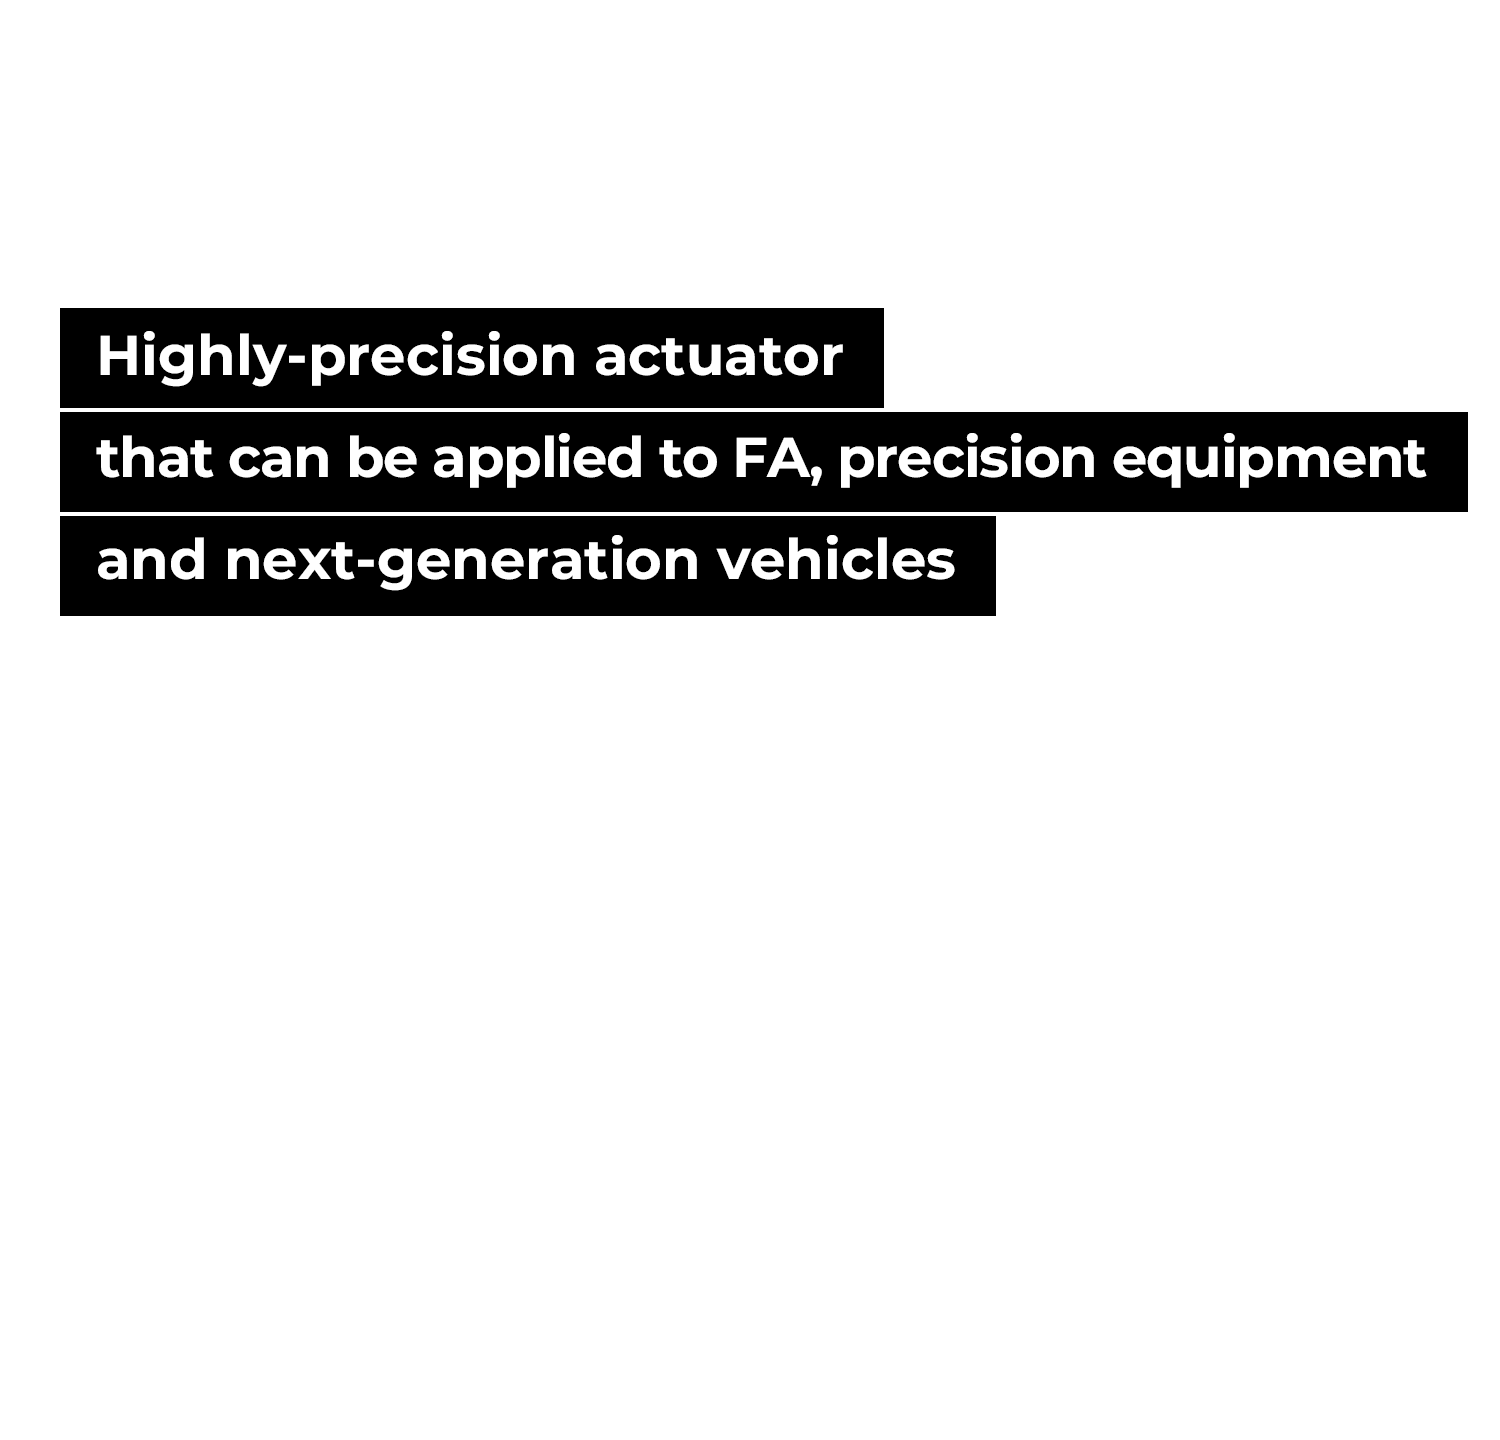 Highly-precision actuator that can be applied to FA, precision equipment and next-generation vehicles